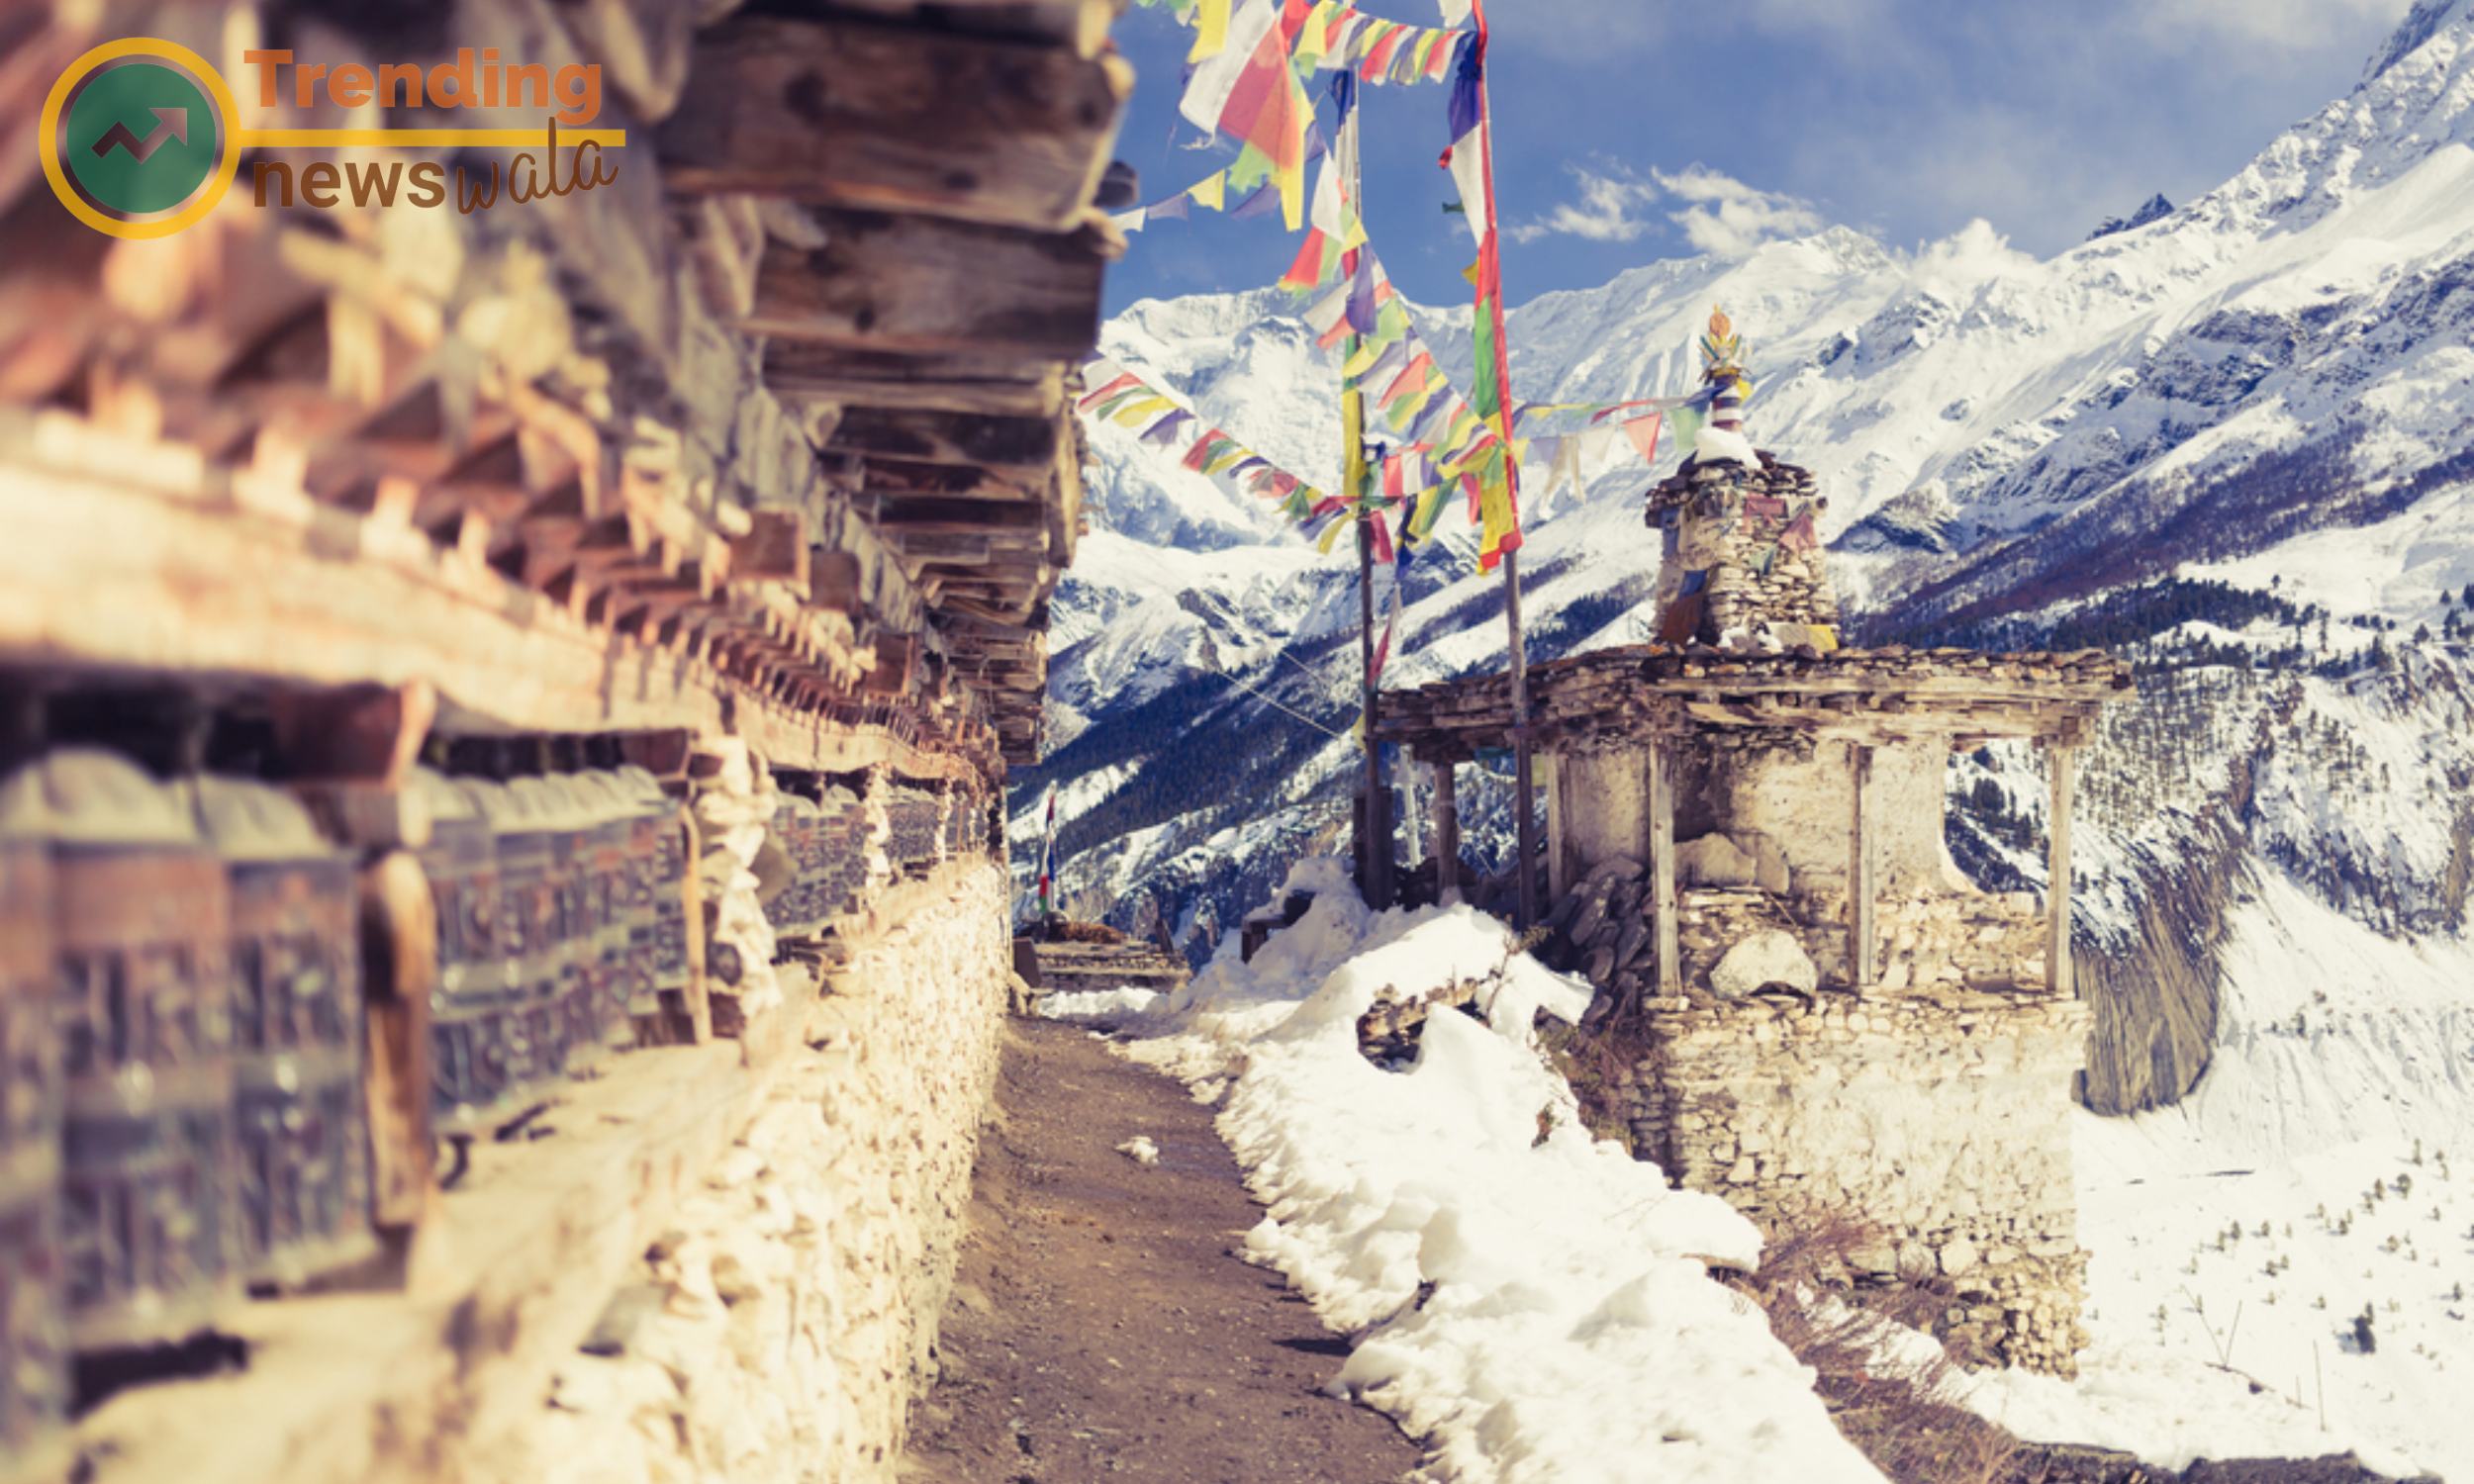 The Annapurna region is not just a feast for the eyes but also a cultural treasure